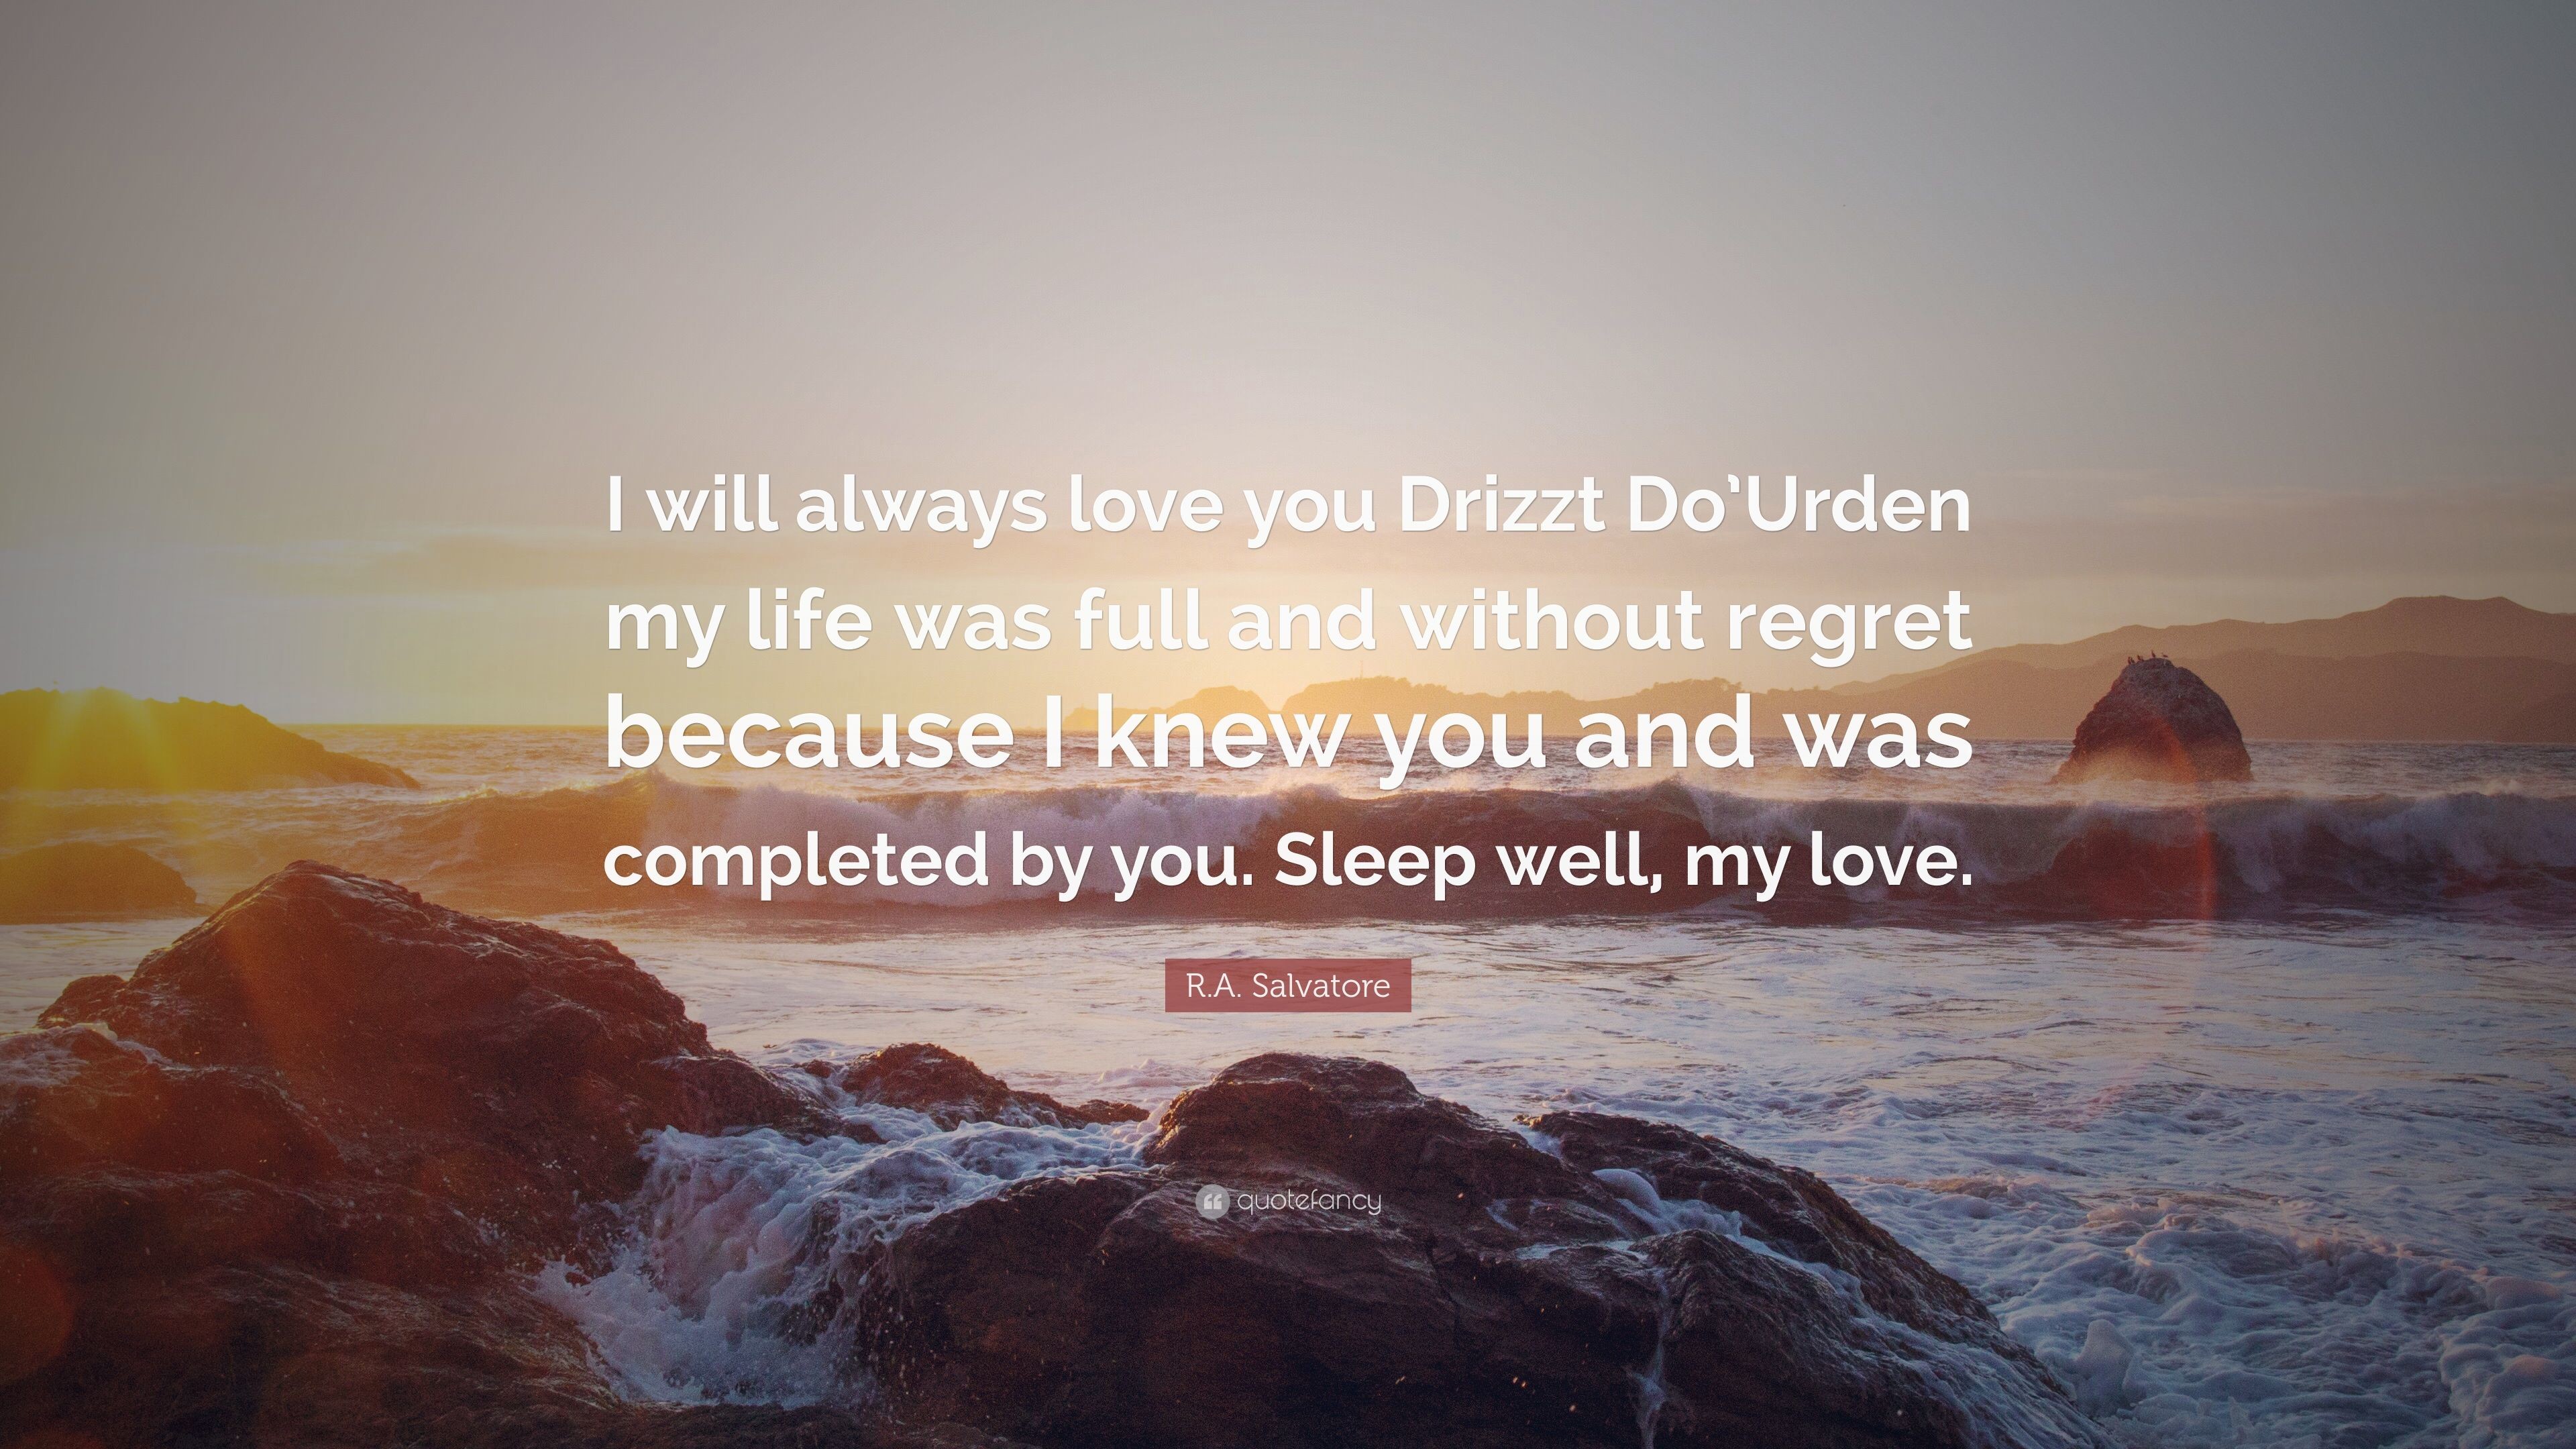 3840x2160 R.A. Salvatore Quote: “I will always love you Drizzt Do'Urden my life